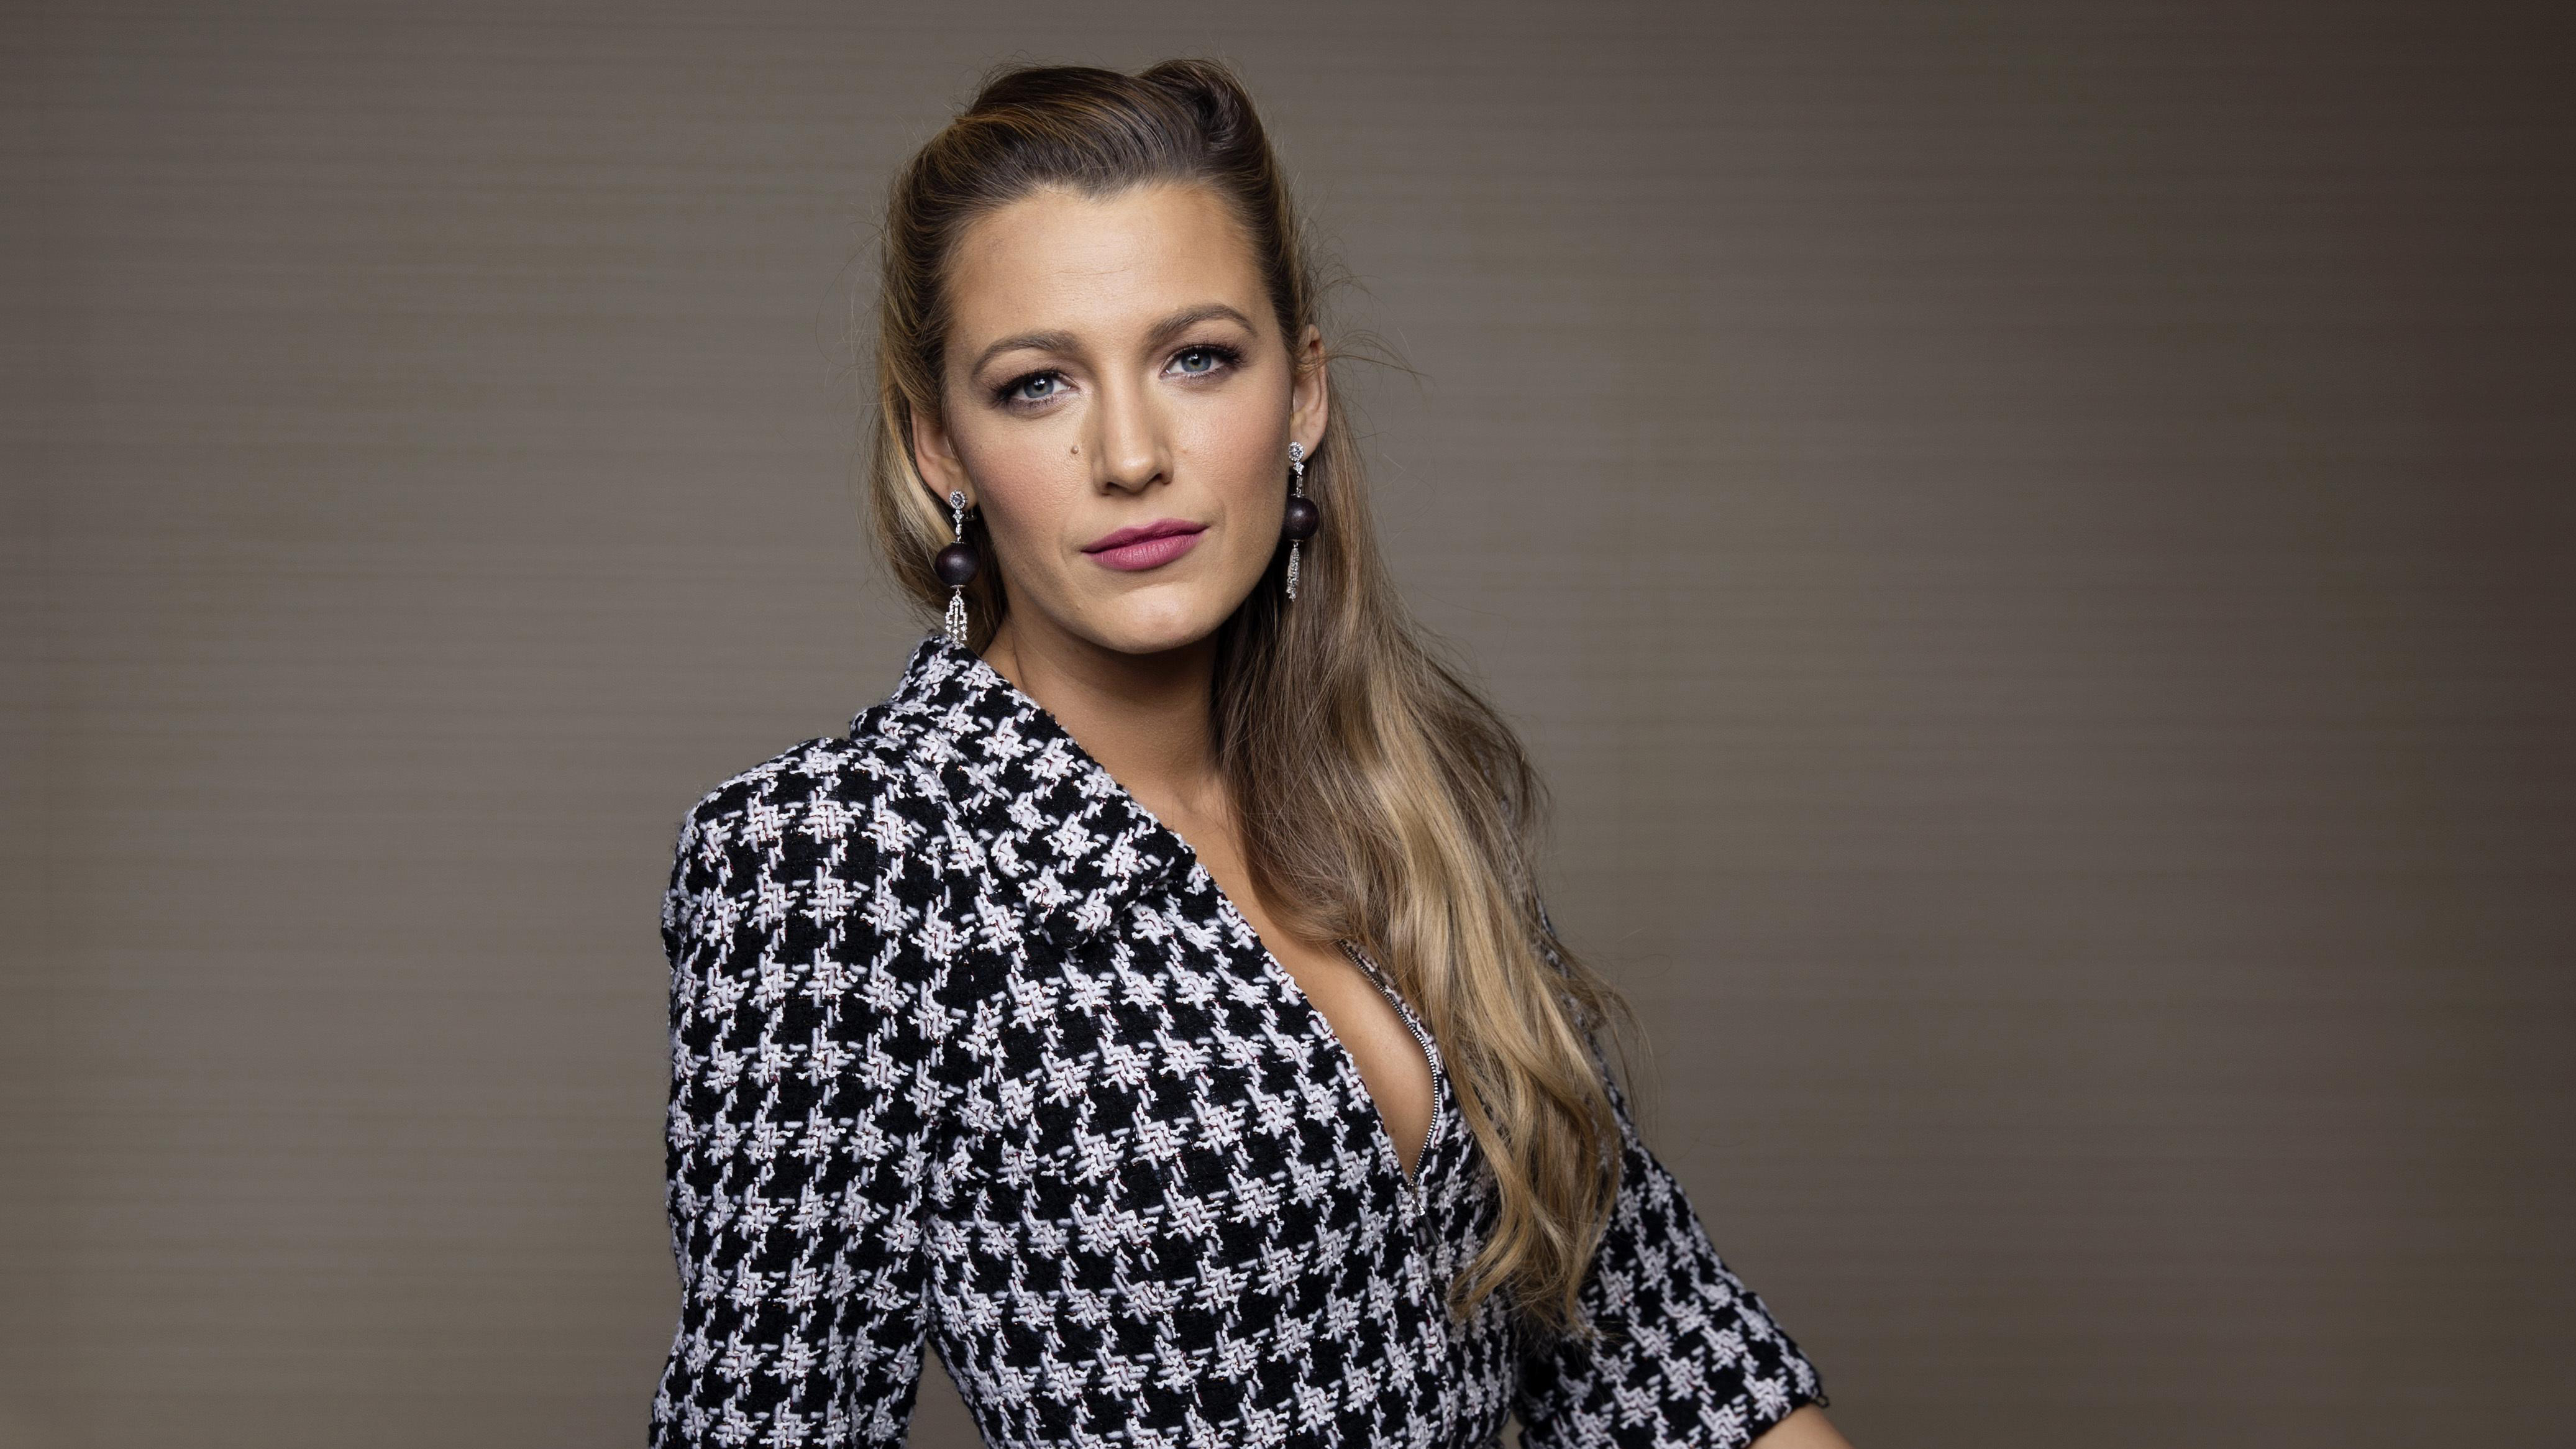 Blake Lively 2019 Wallpapers